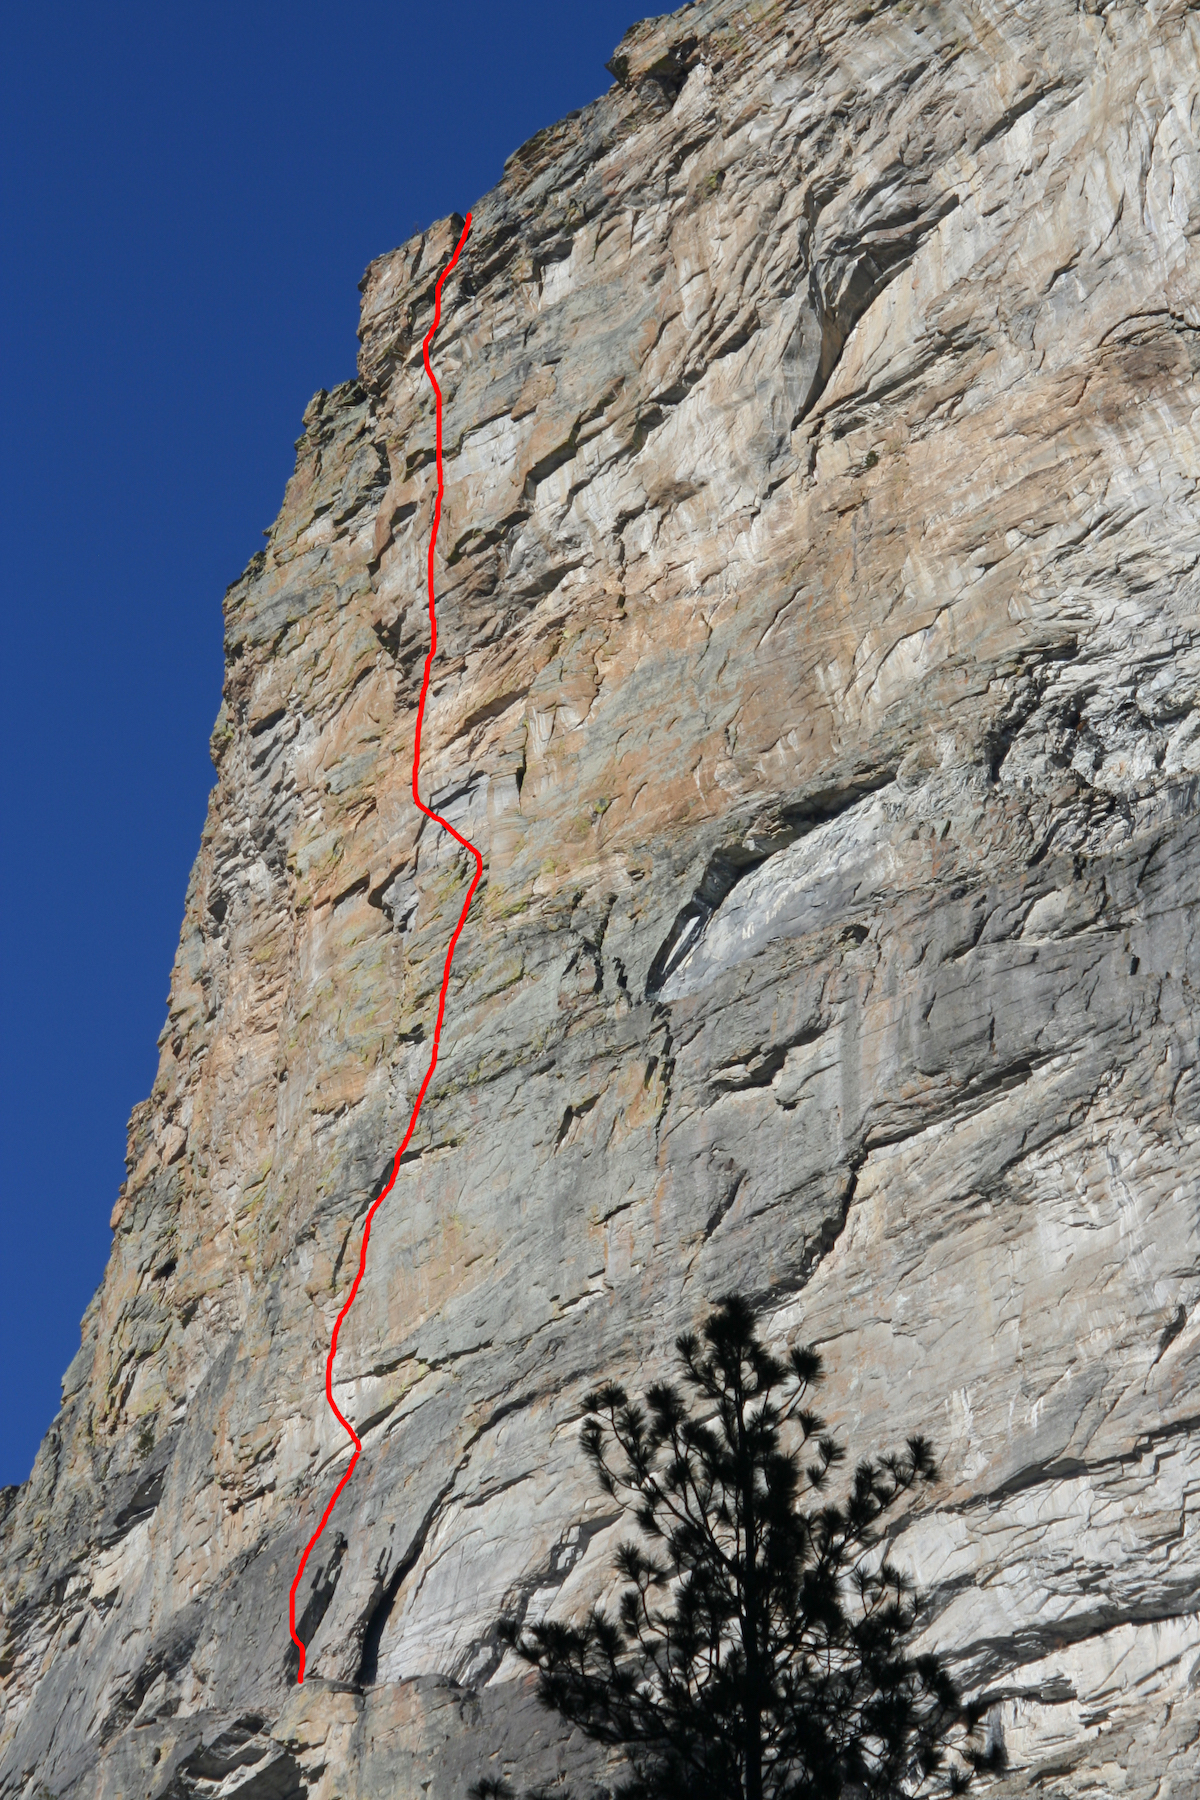 The red line shows the route of Super Ultra Mega (5.13a, 8 pitches). [Photo] Winter Ramos